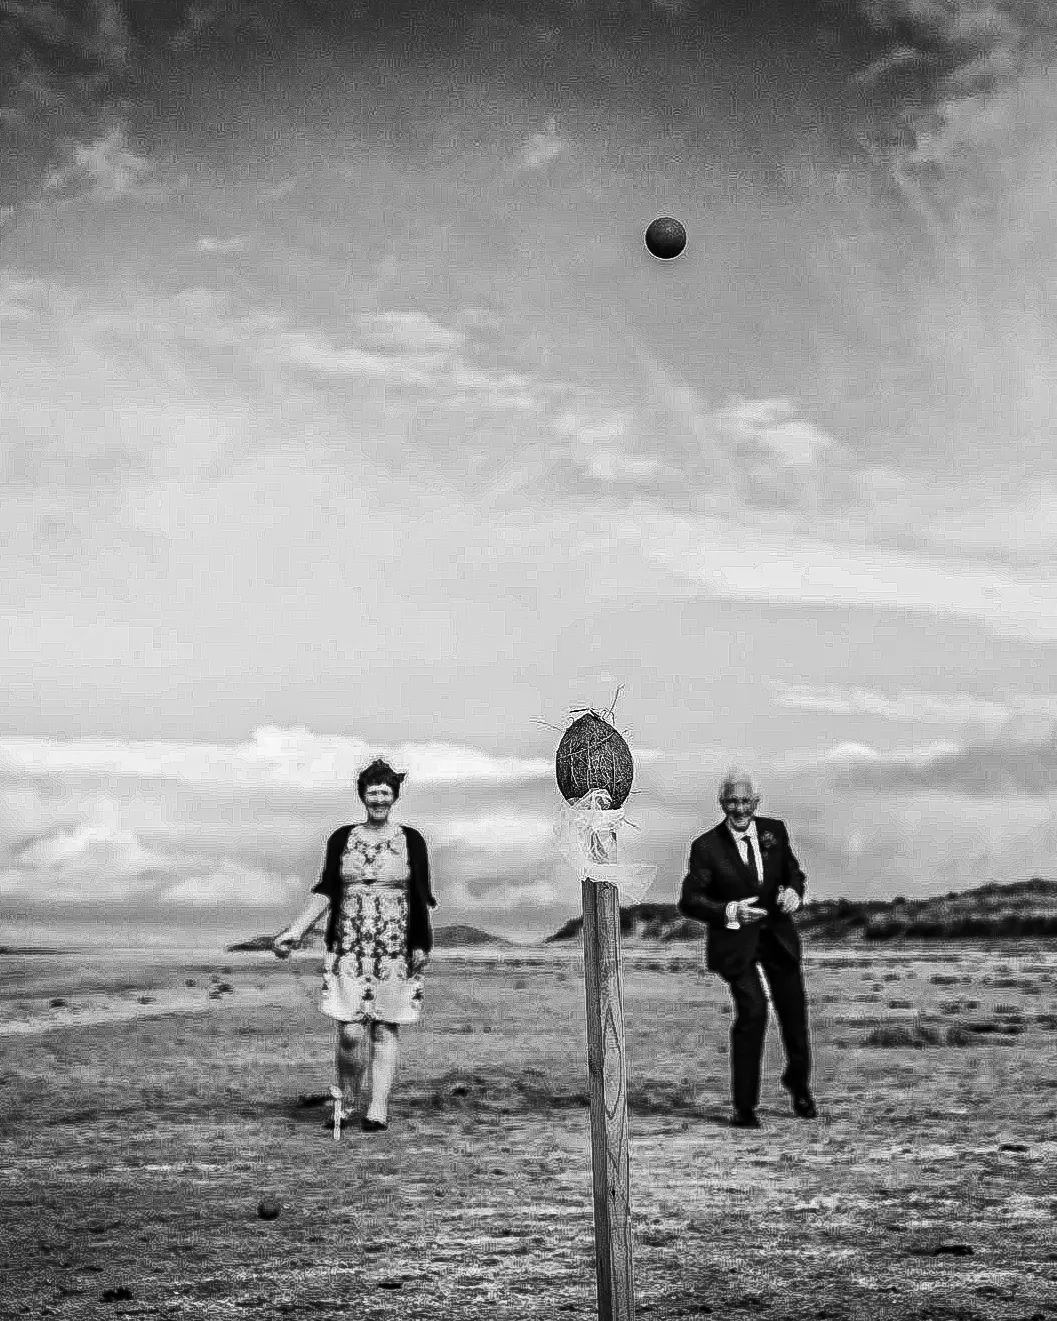 It's been a weekend for beach games hasn't it just.

#beachwedding #weddinggames
#2025wedding #2024wedding
#blackandwhiteweddingphotography
#candidweddingphotography